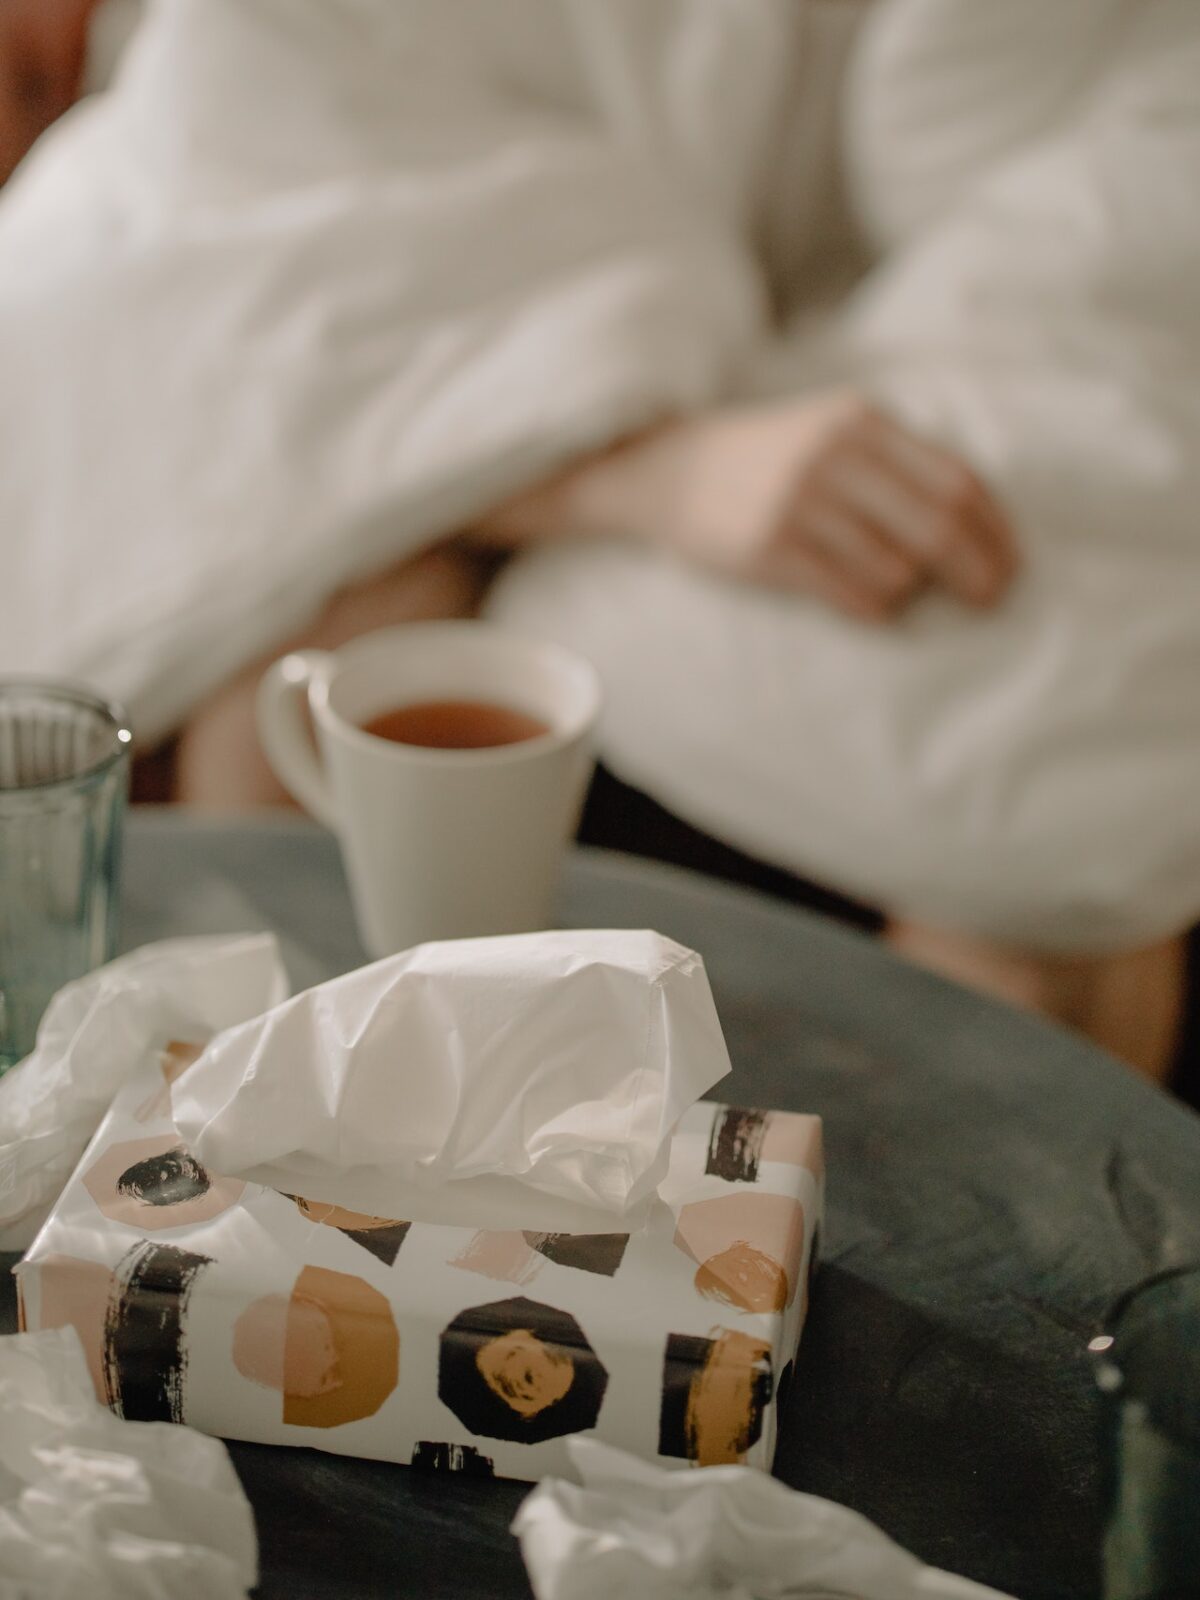 used tissues, hot tea, person wrapped in blanket